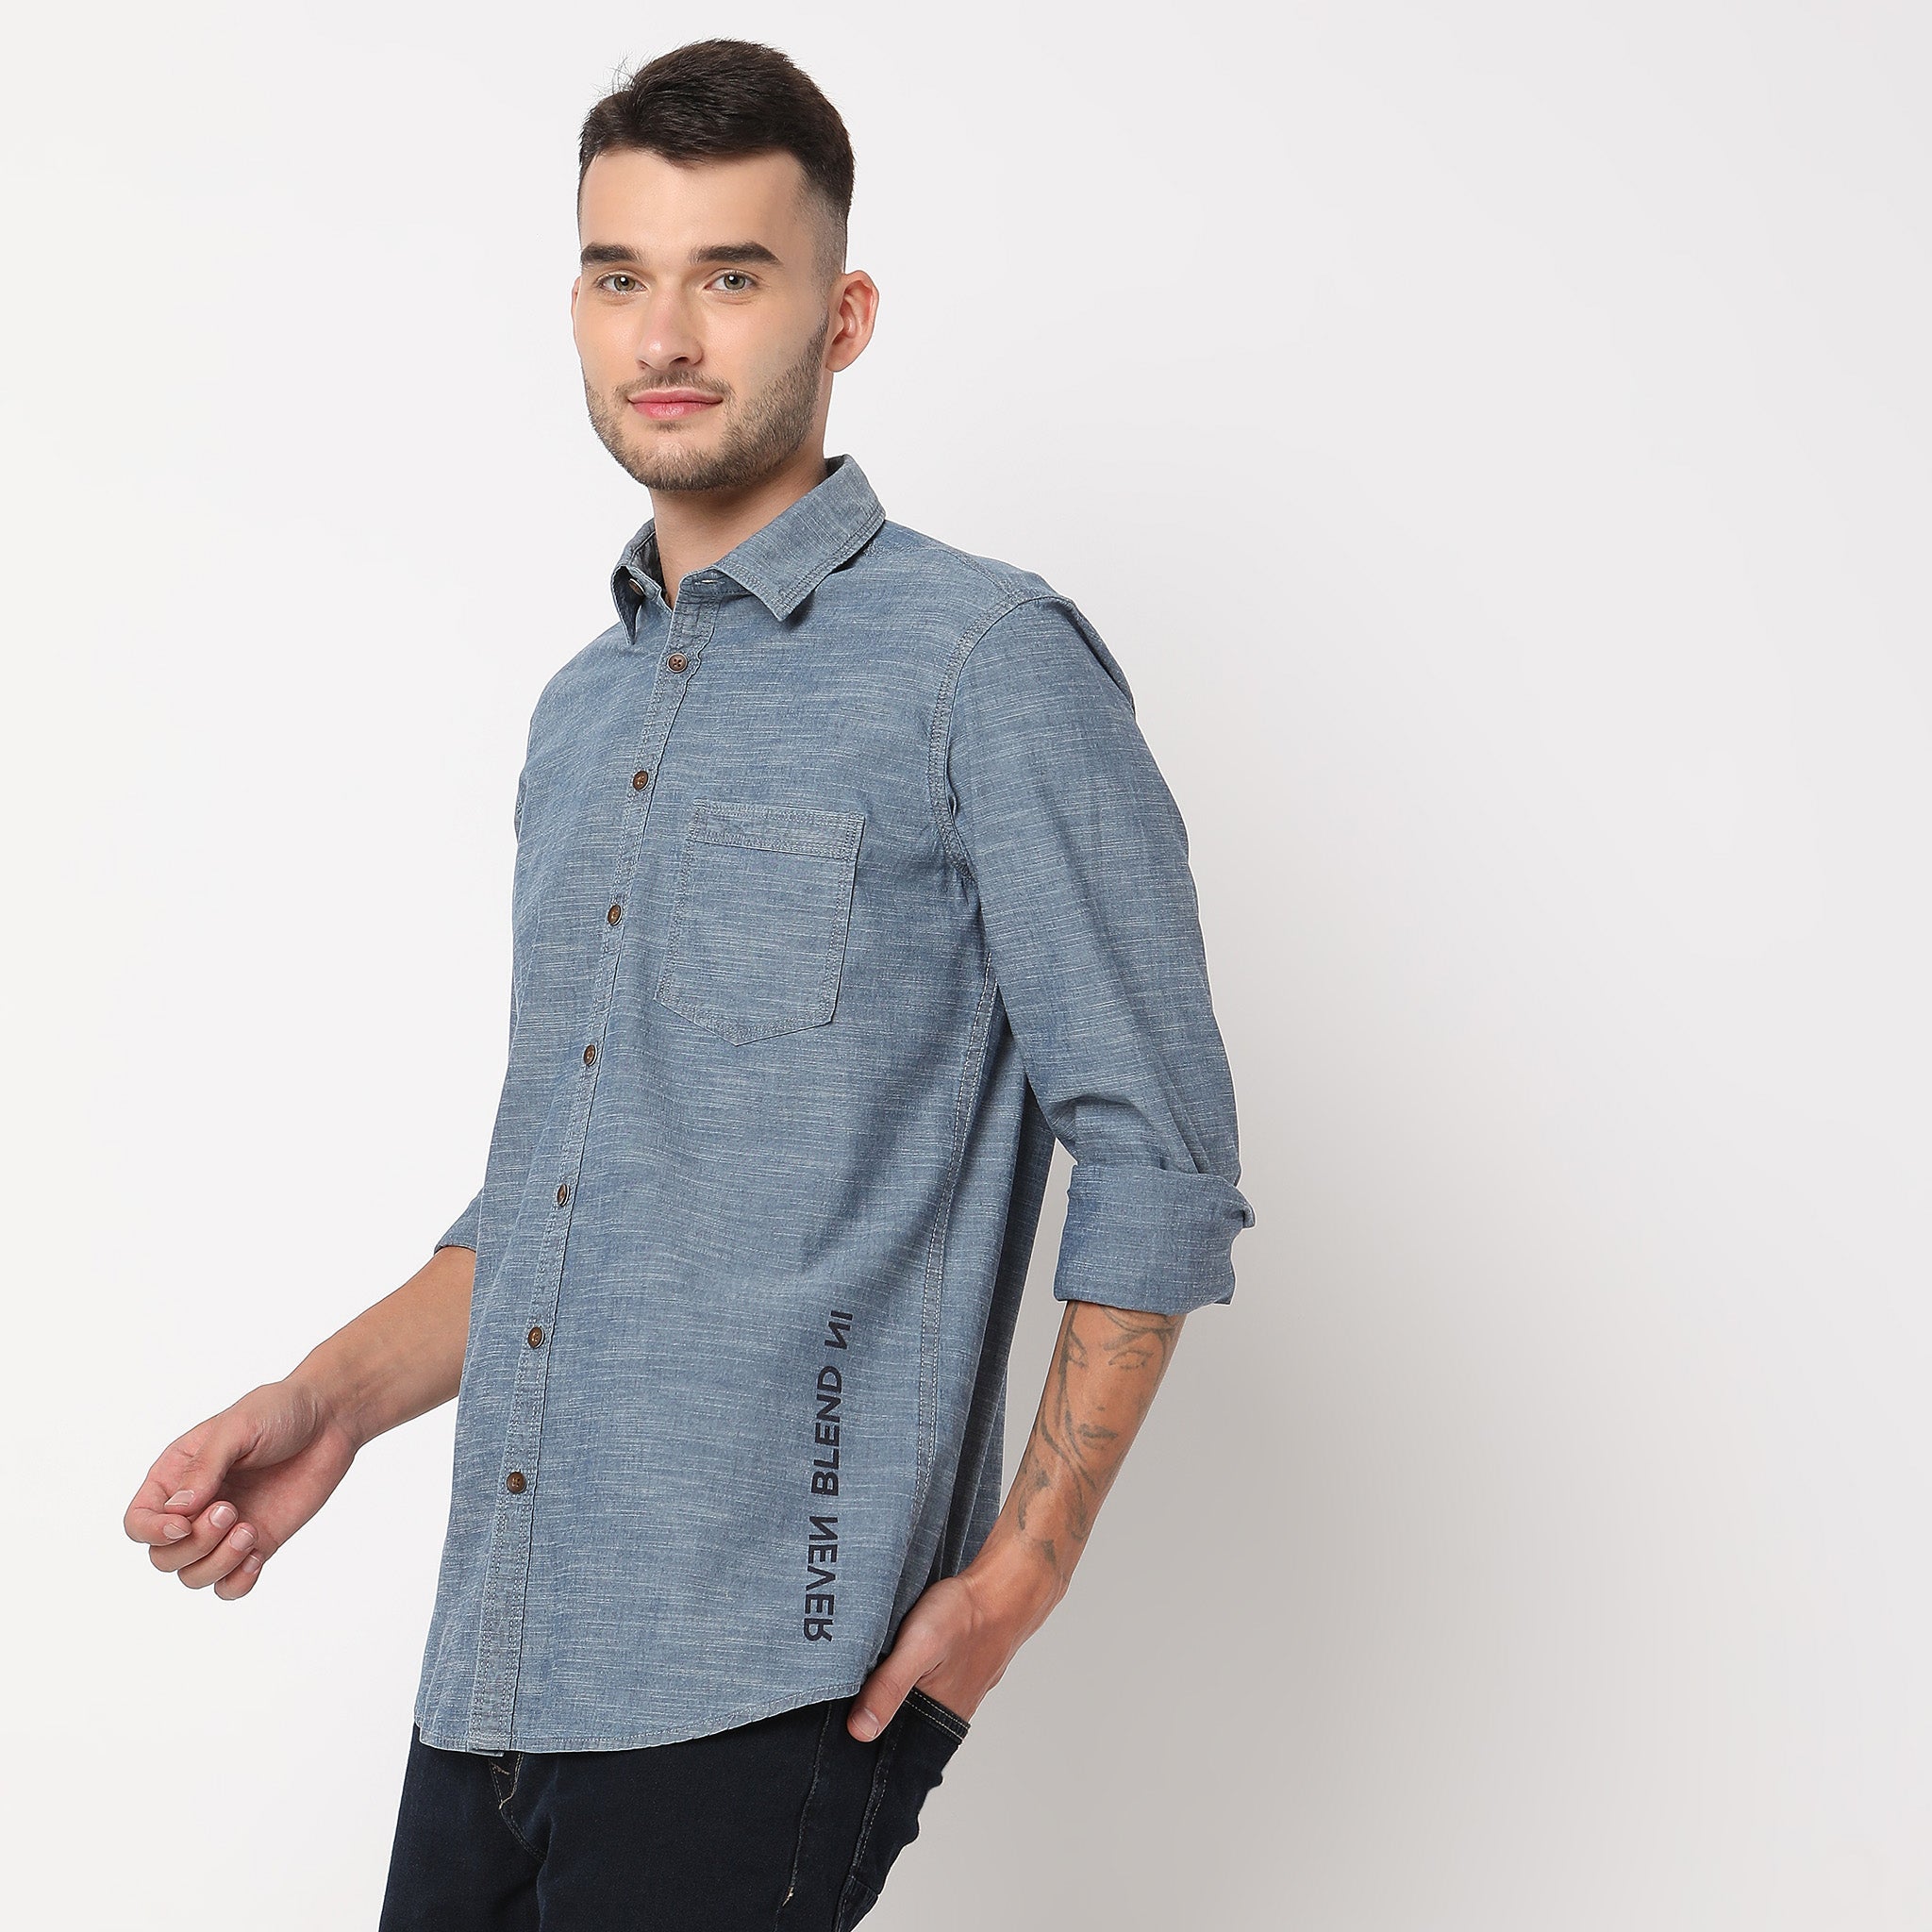 Men Wearing Relaxed Fit Checkered Shirt